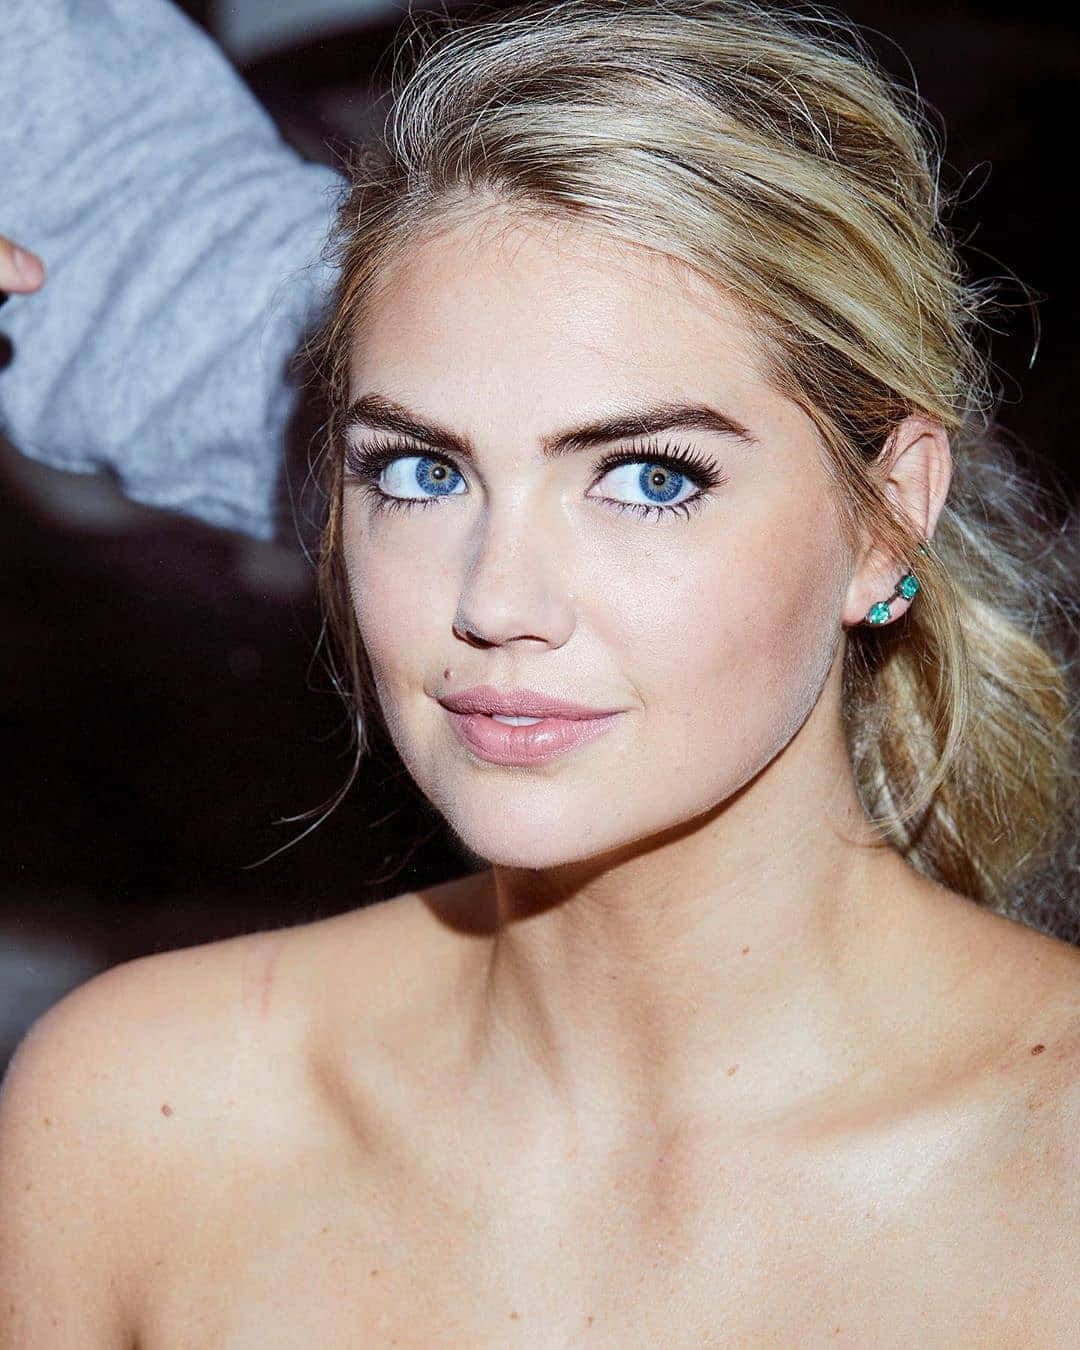 Kate Upton – An All-american Beauty